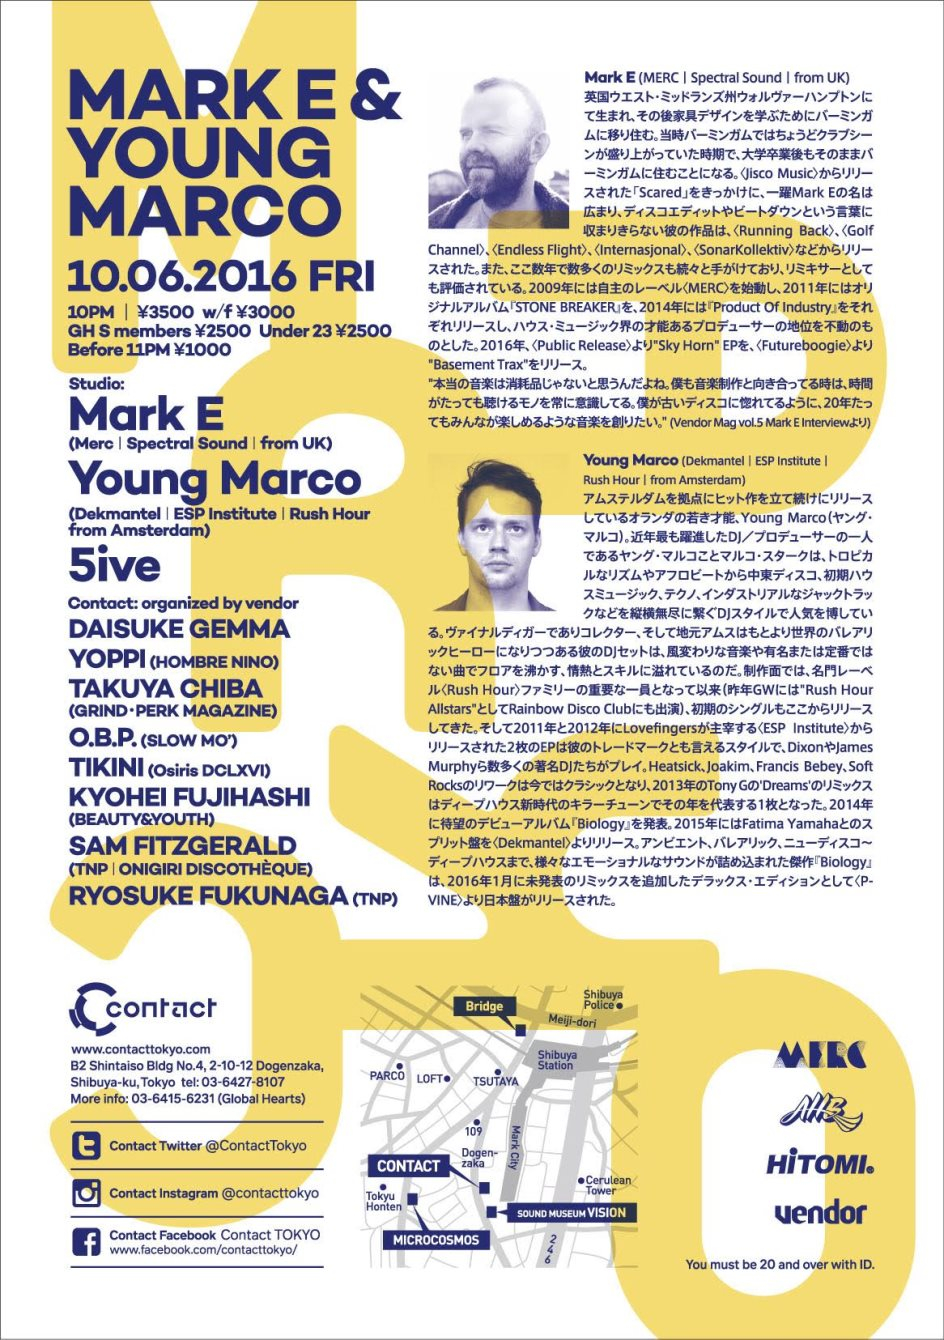 Mark E, Young Marco - Flyer back